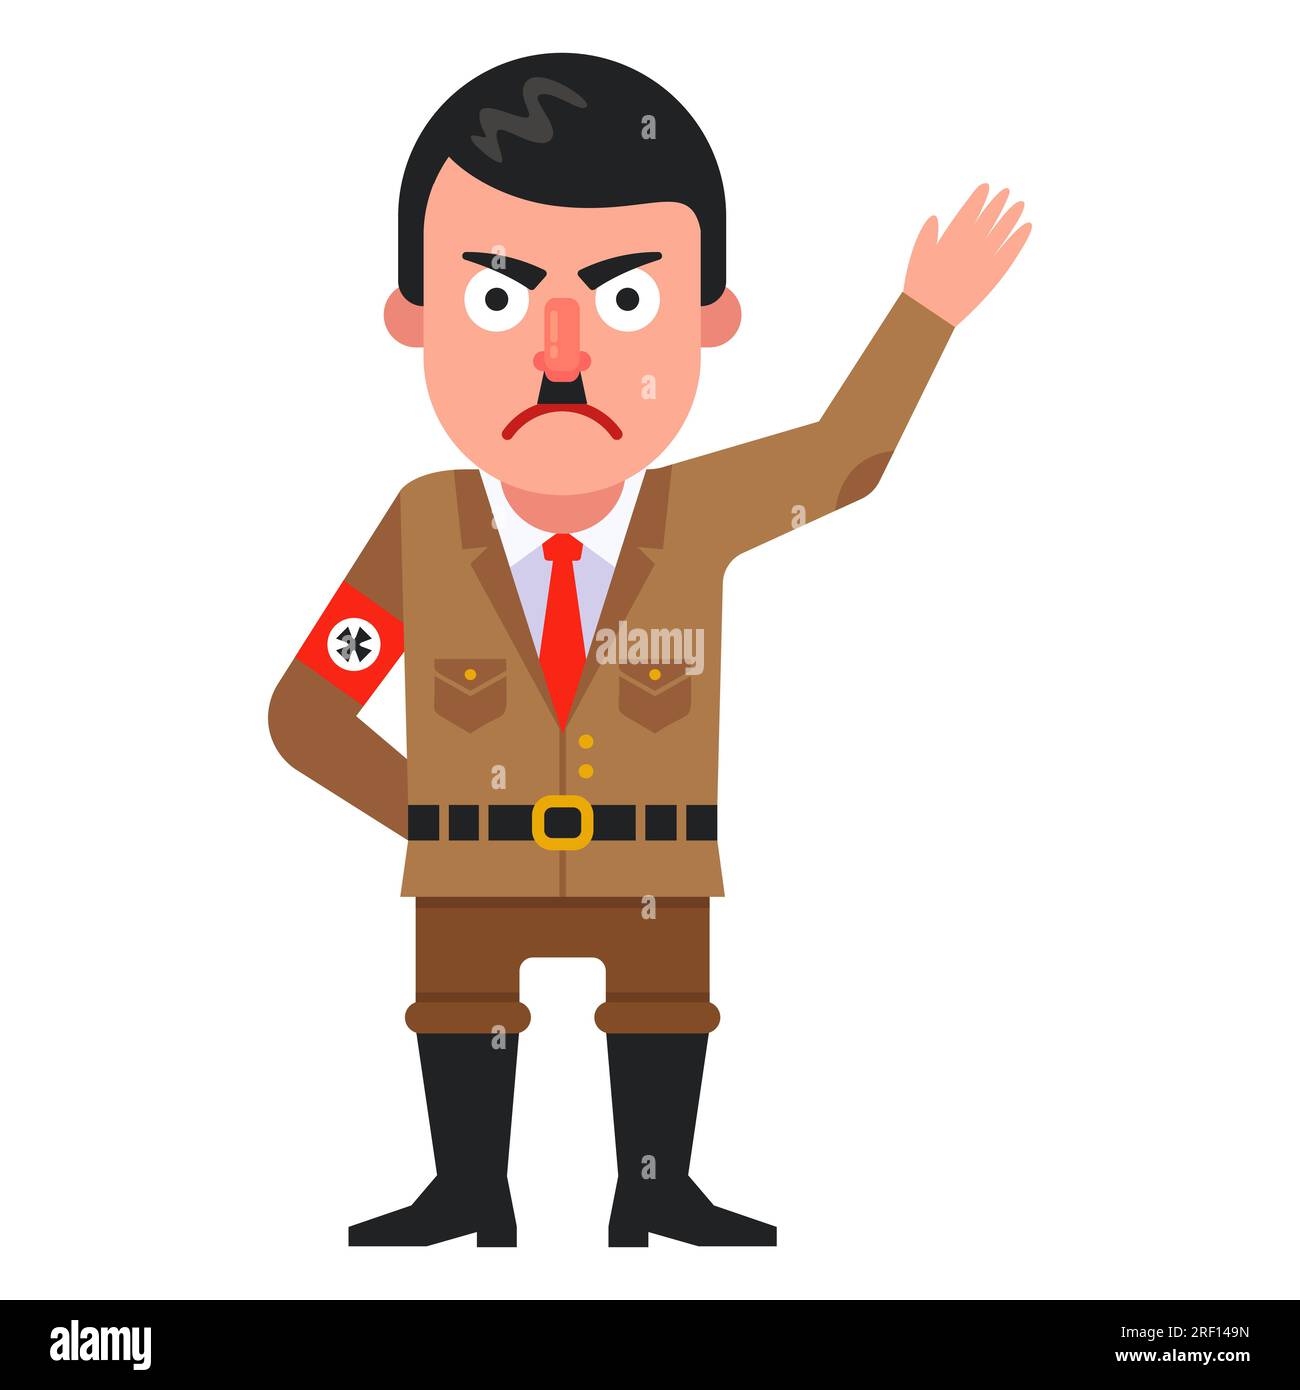 adolf hitler a nazi. dictator character in germany. flat vector illustration. Stock Vector